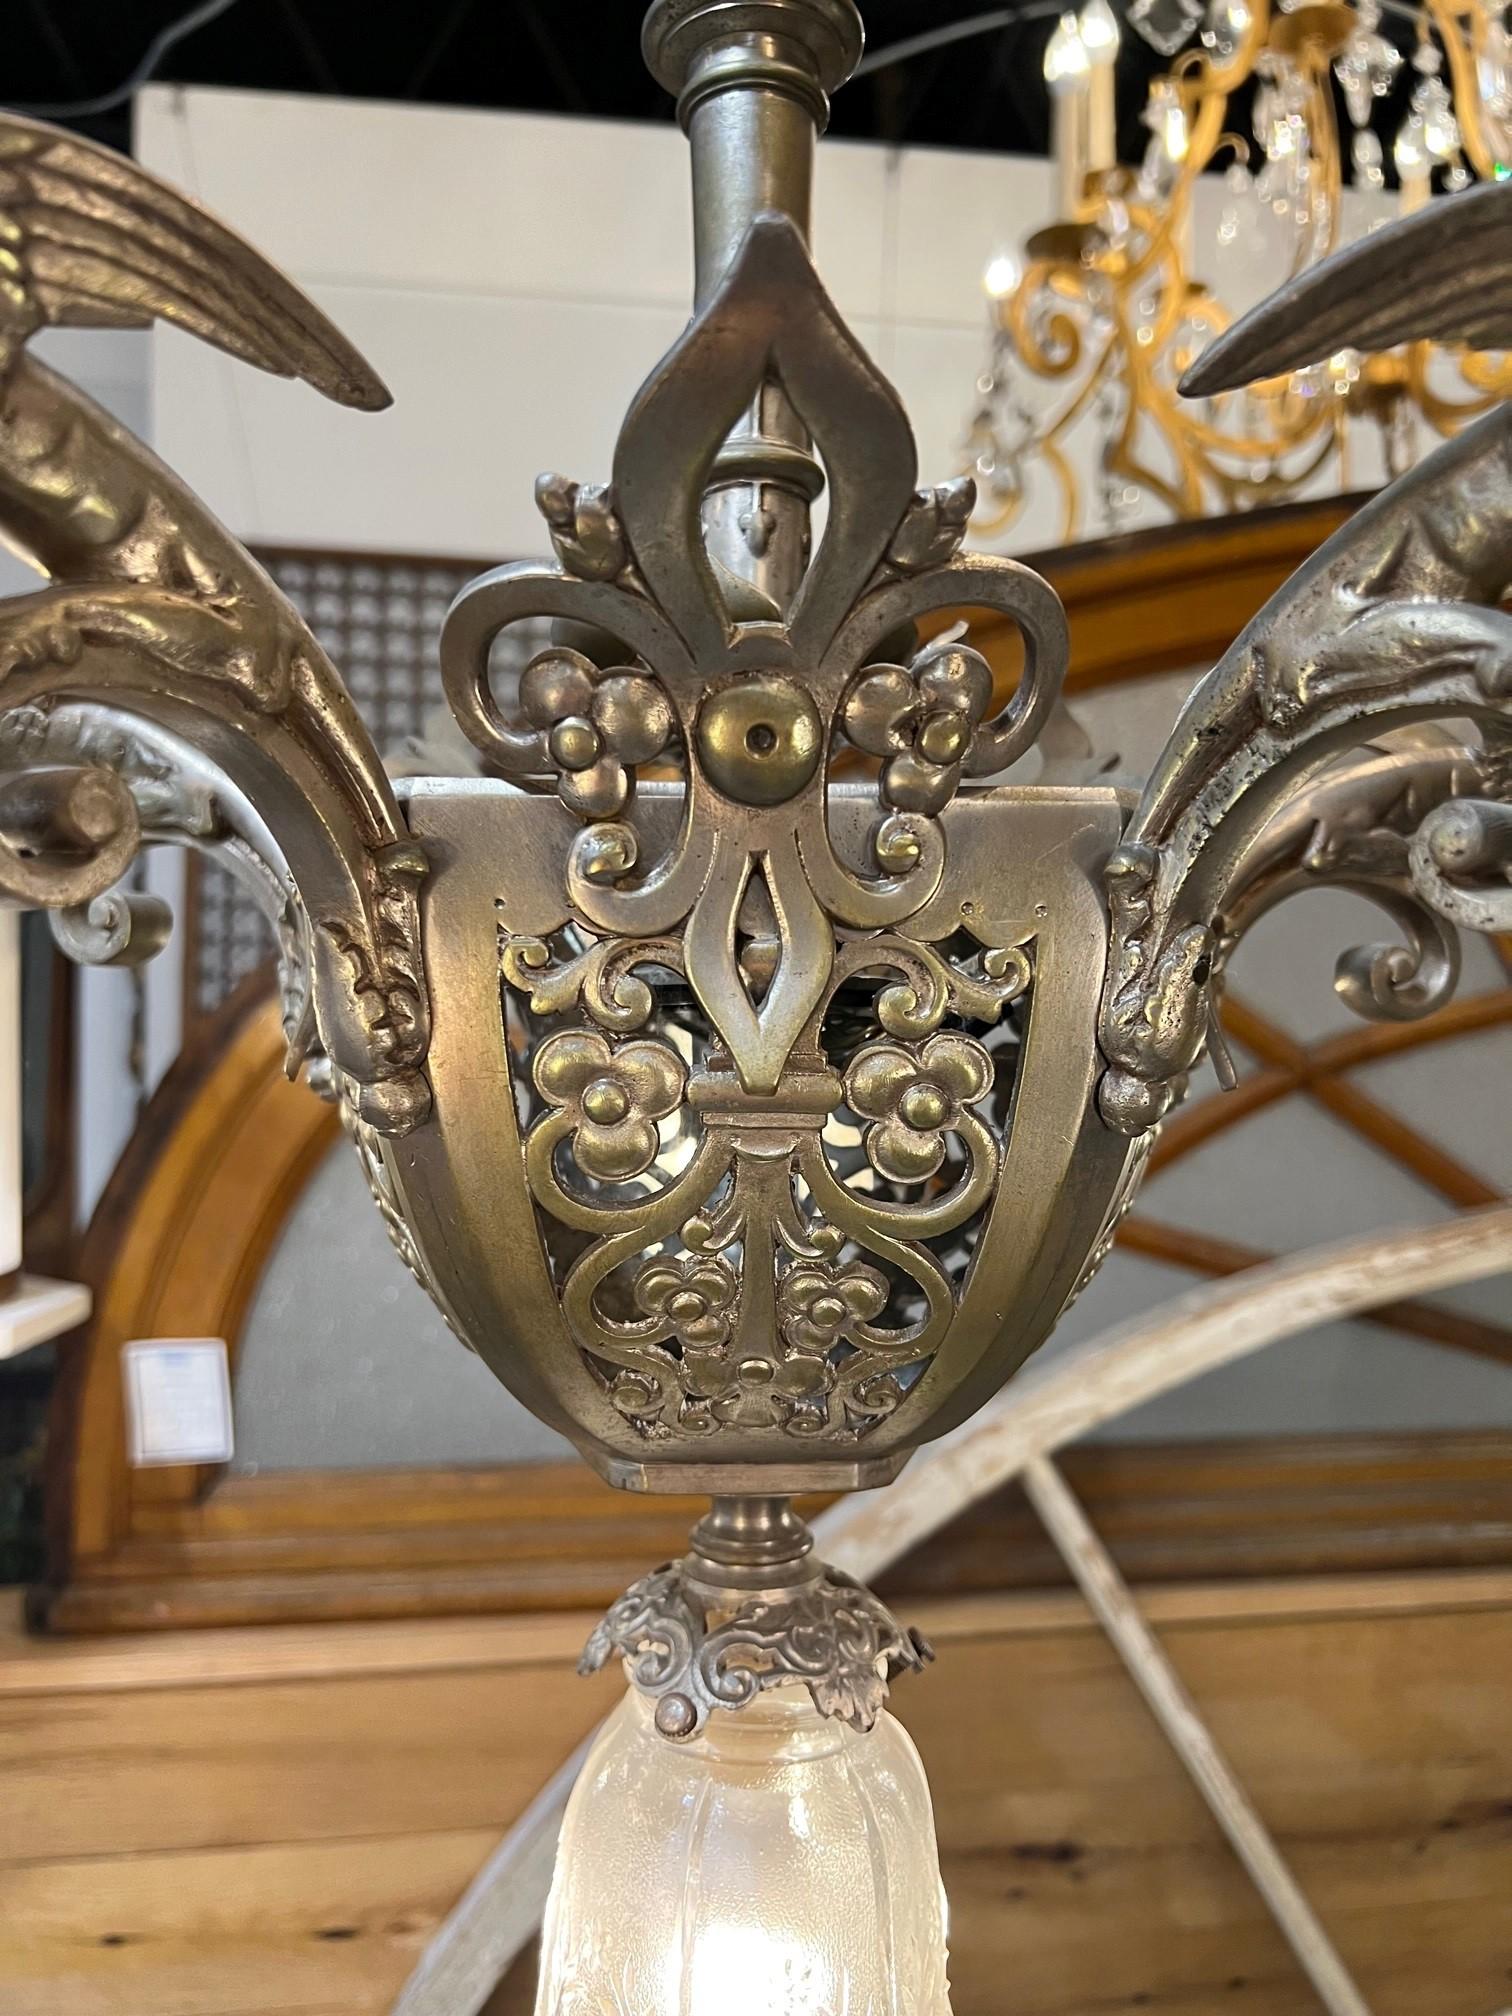 Antique Brushed Nickel Finish Brass 6 Light Chandelier with 5 Griffin Arms  In Good Condition For Sale In Stamford, CT